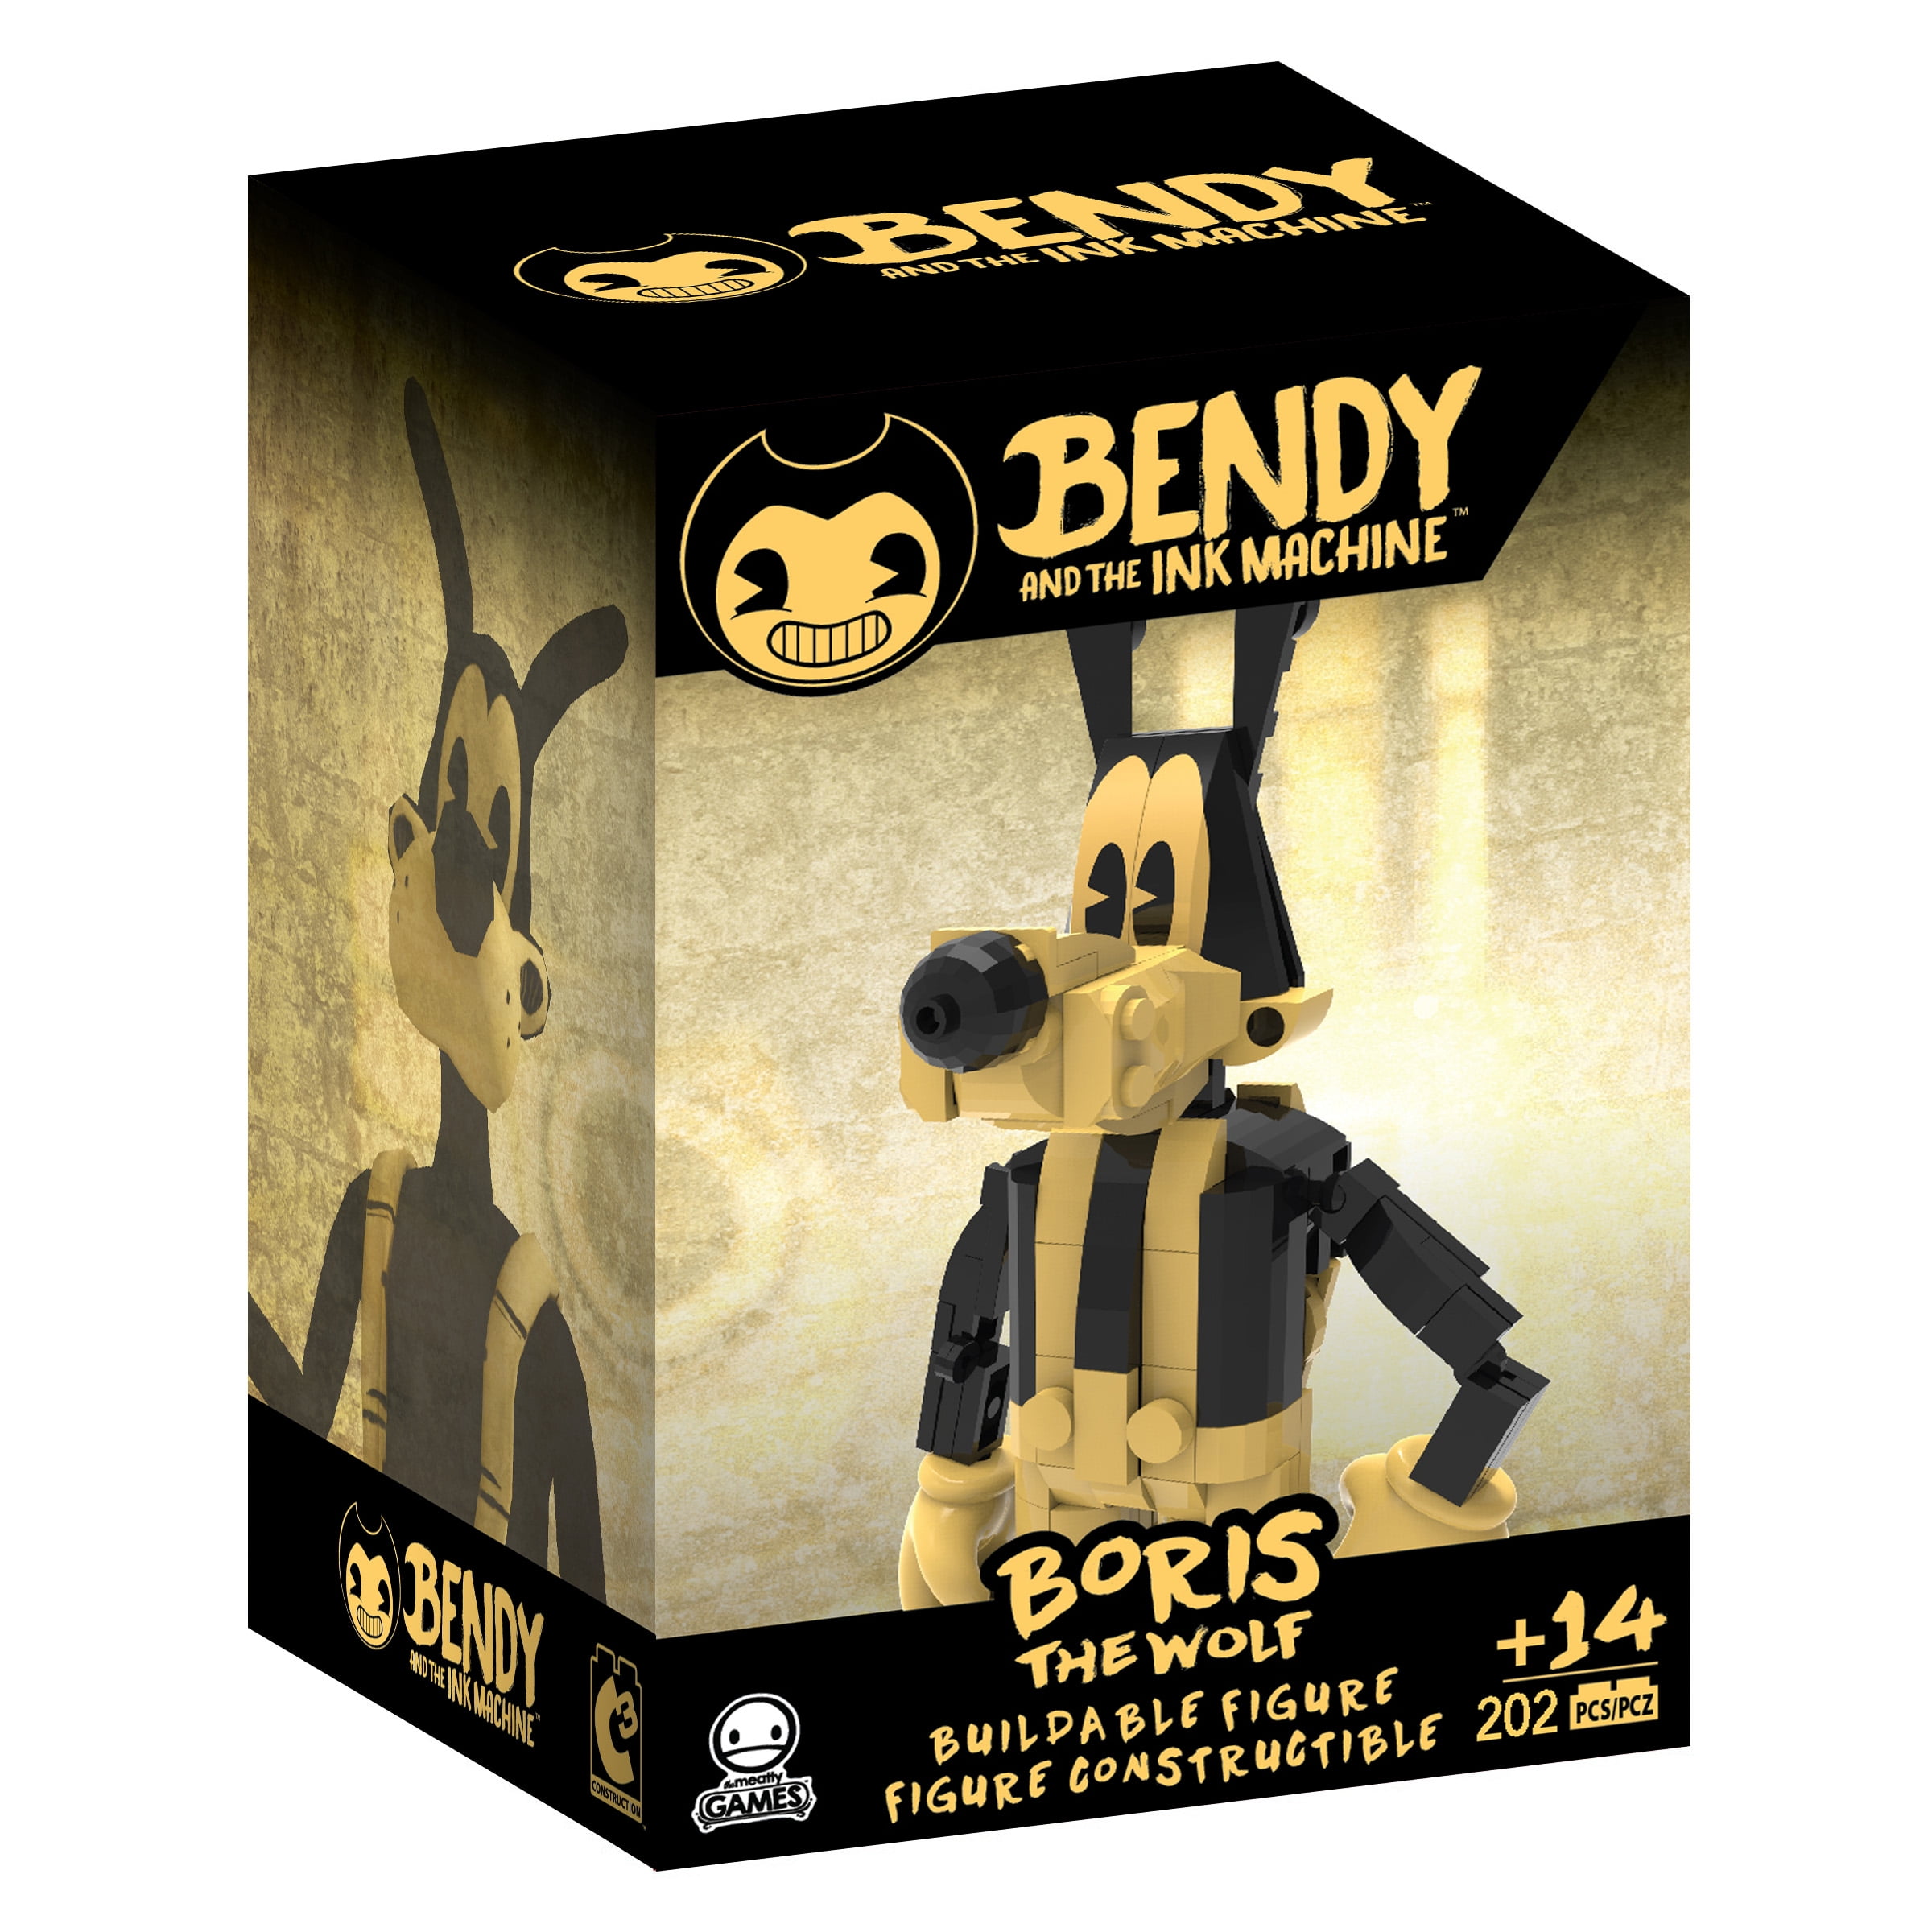 Batim (Bendy and the ink machine), by bj180863 bj180863